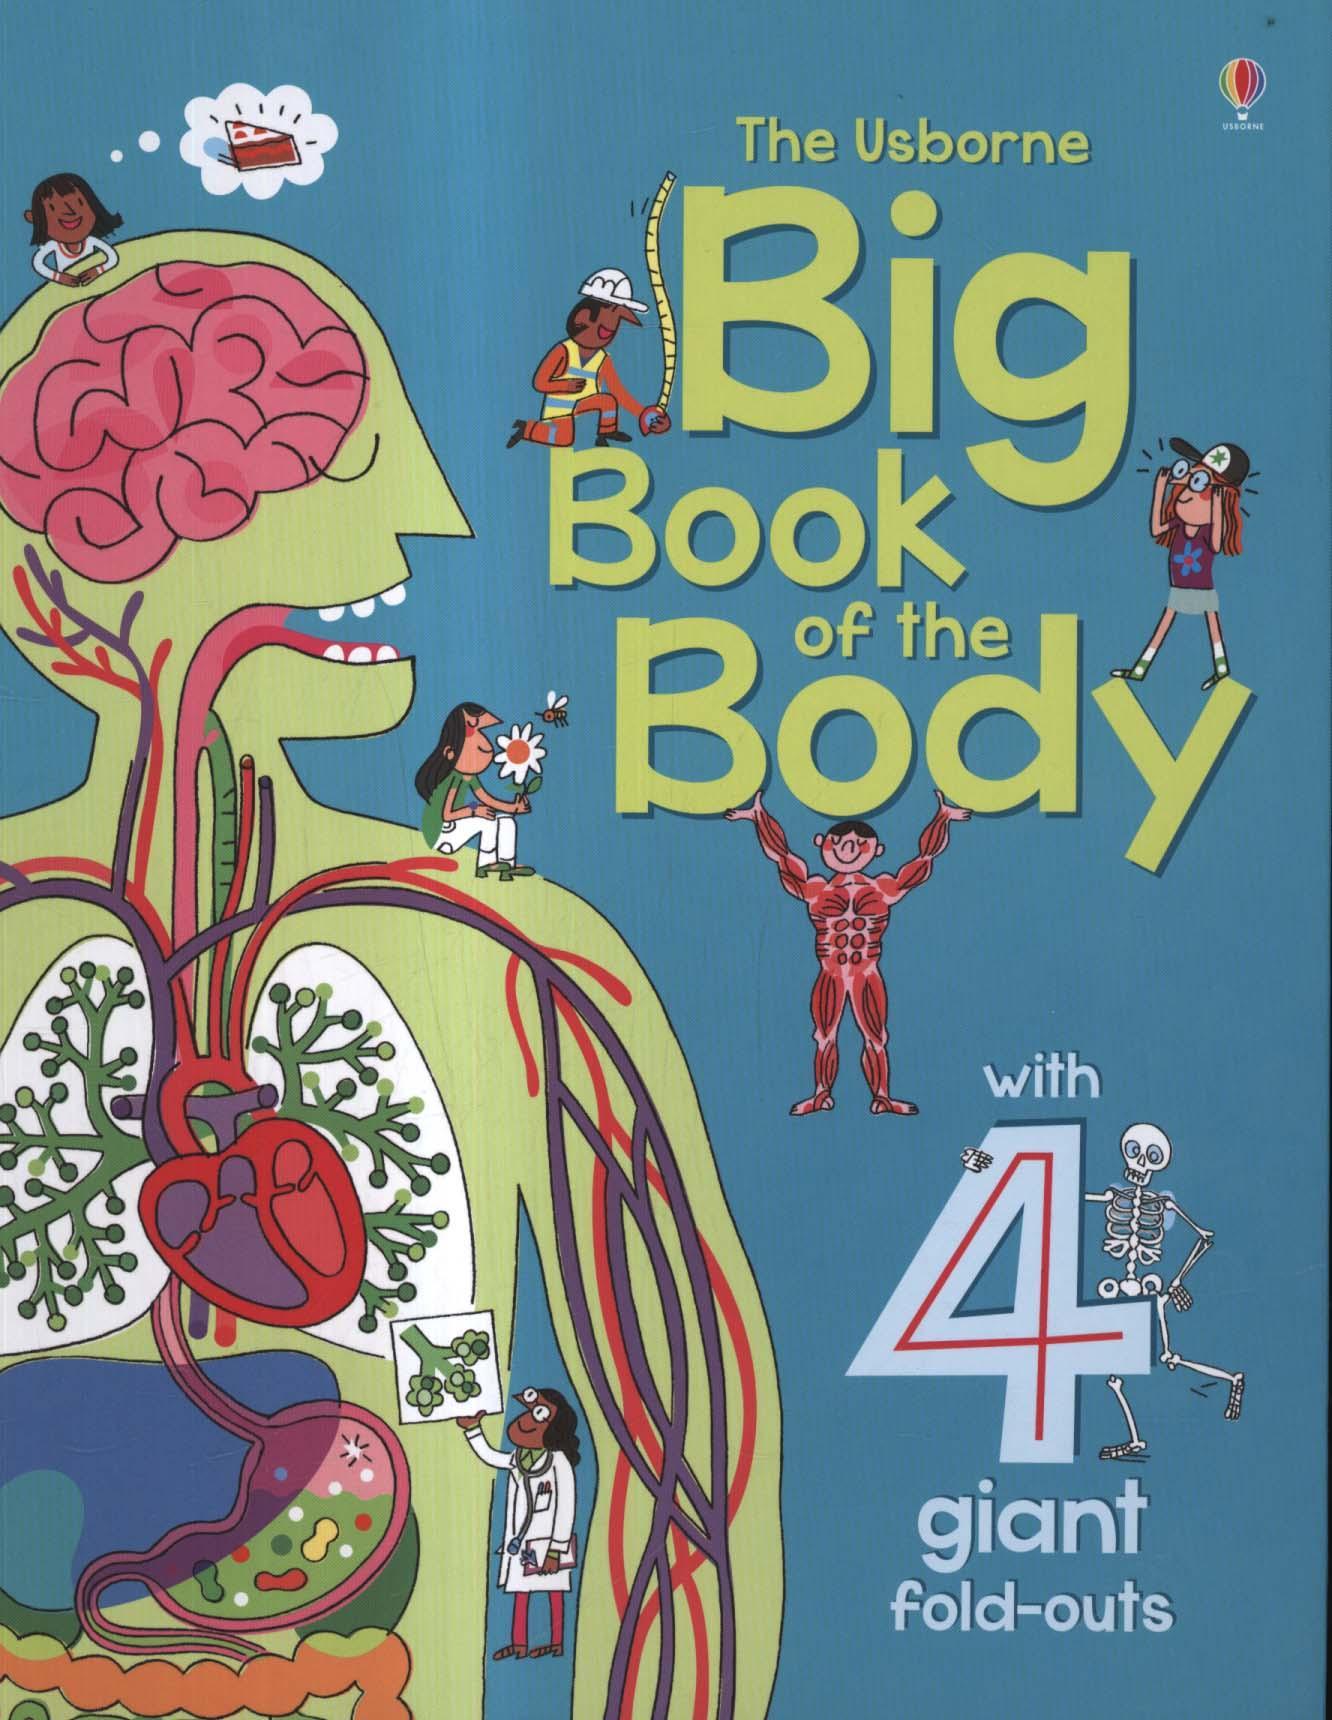 Big Book of the Body